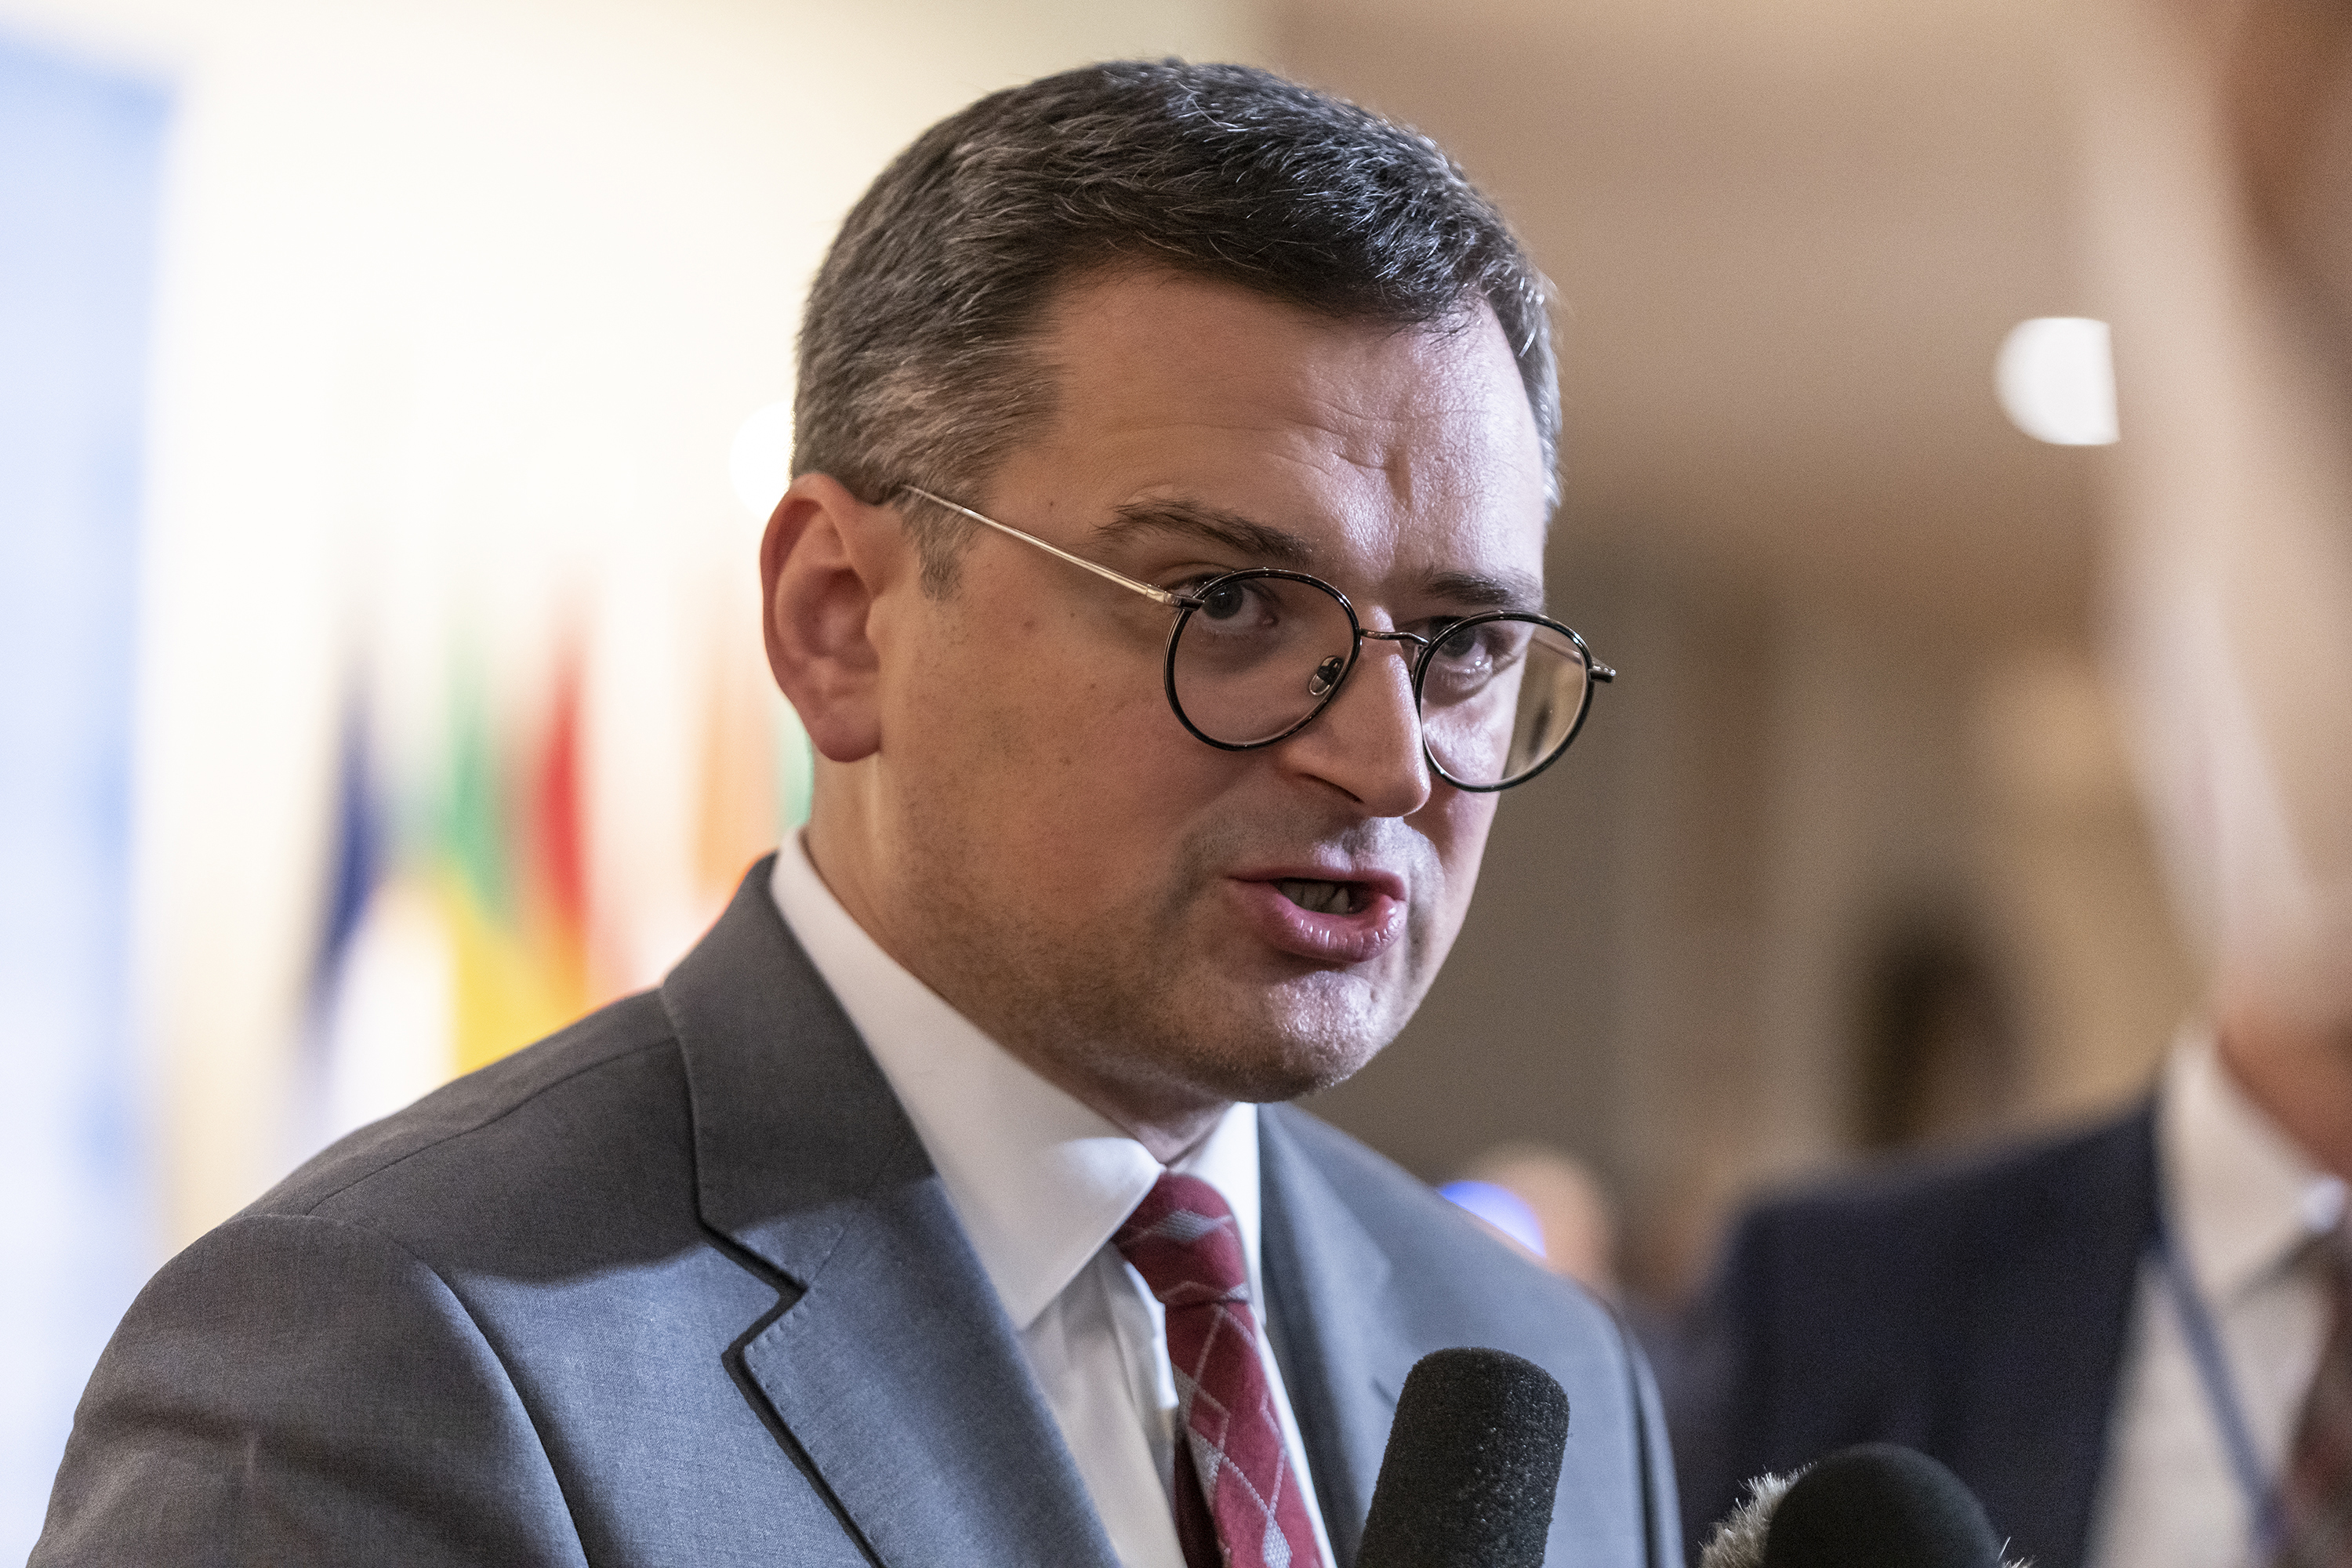 Ukrainian Foreign Minister Dmytro Kuleba speaks at a press conference after Security Council meeting at UN headquarters in New York, on September 22.